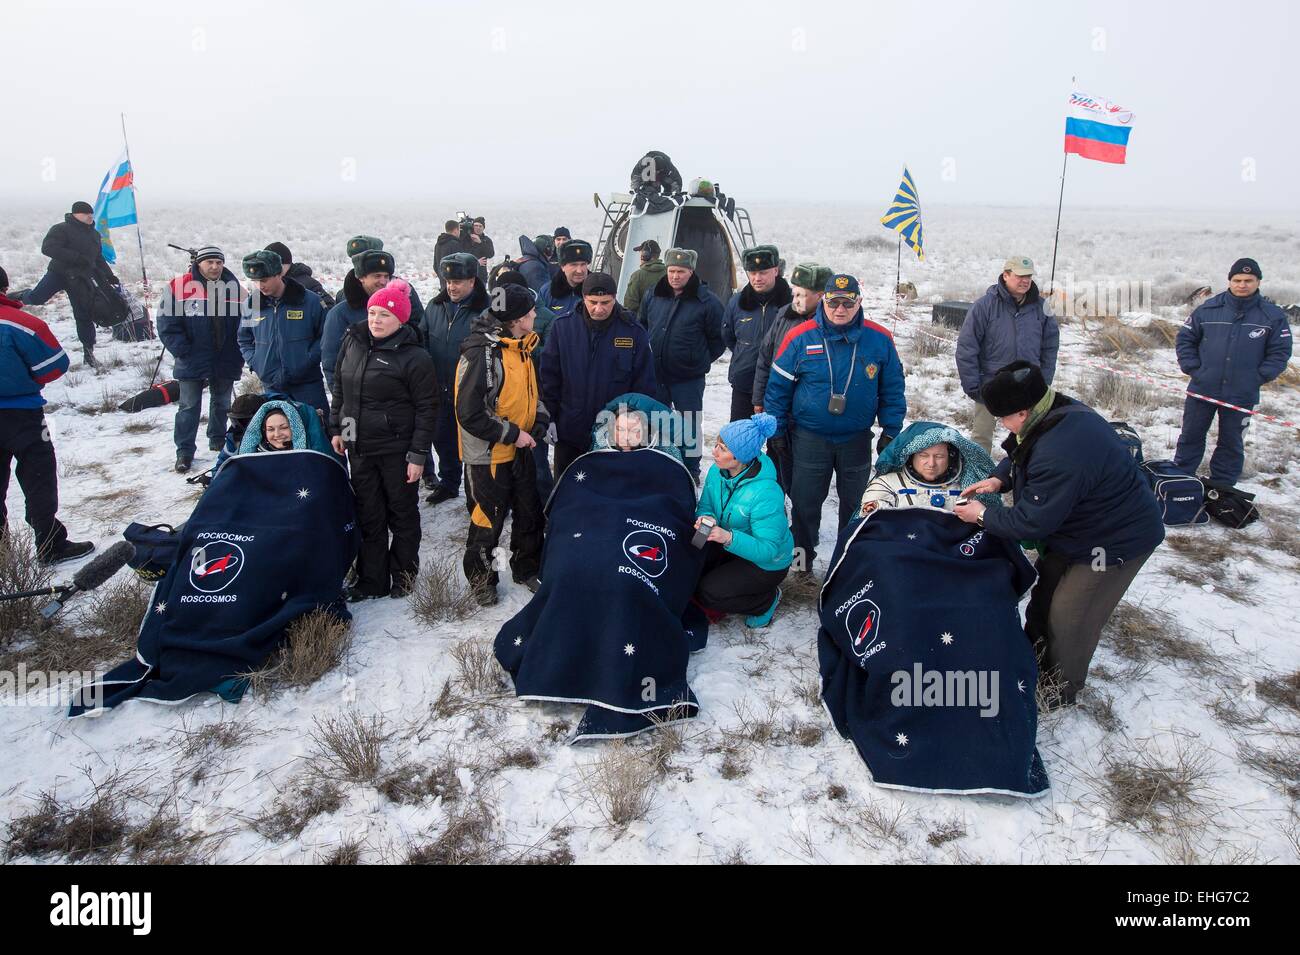 ISS Expedition 42 crew Russian Cosmonaut Elena Serova, left, Alexander Samokutyaev and NASA Astronaut Barry Wilmore sit in chairs outside the Soyuz TMA-14M  capsule just minutes after they landed in a remote area March 13, 20154 near Zhezkazgan, Kazakhstan. The crew is returning after almost six months onboard the International Space Station. Stock Photo